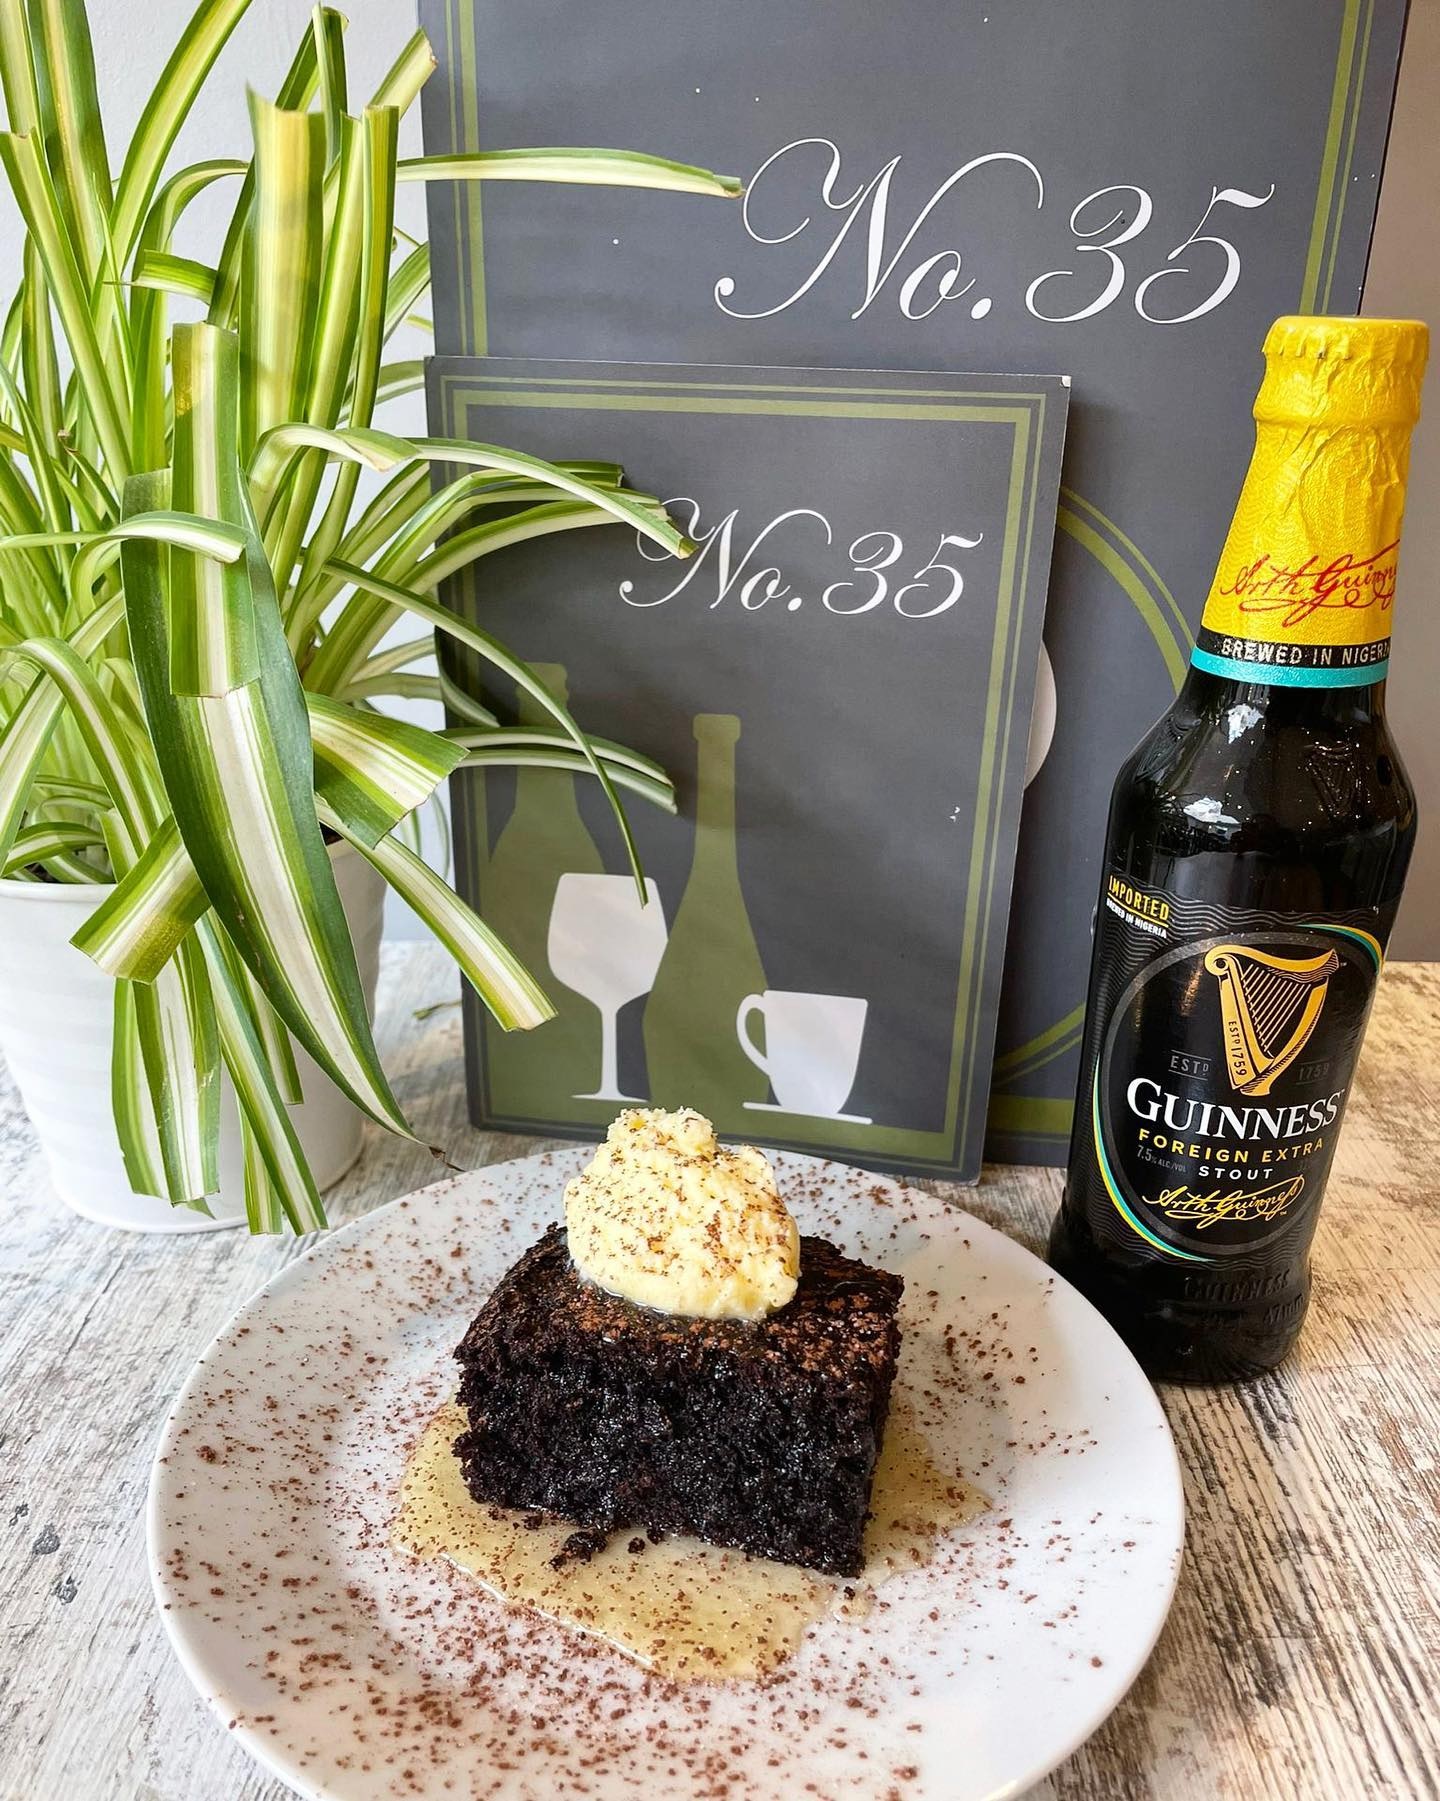 A photo of a plated brownie and ice cream with a glass bottle of Guinness